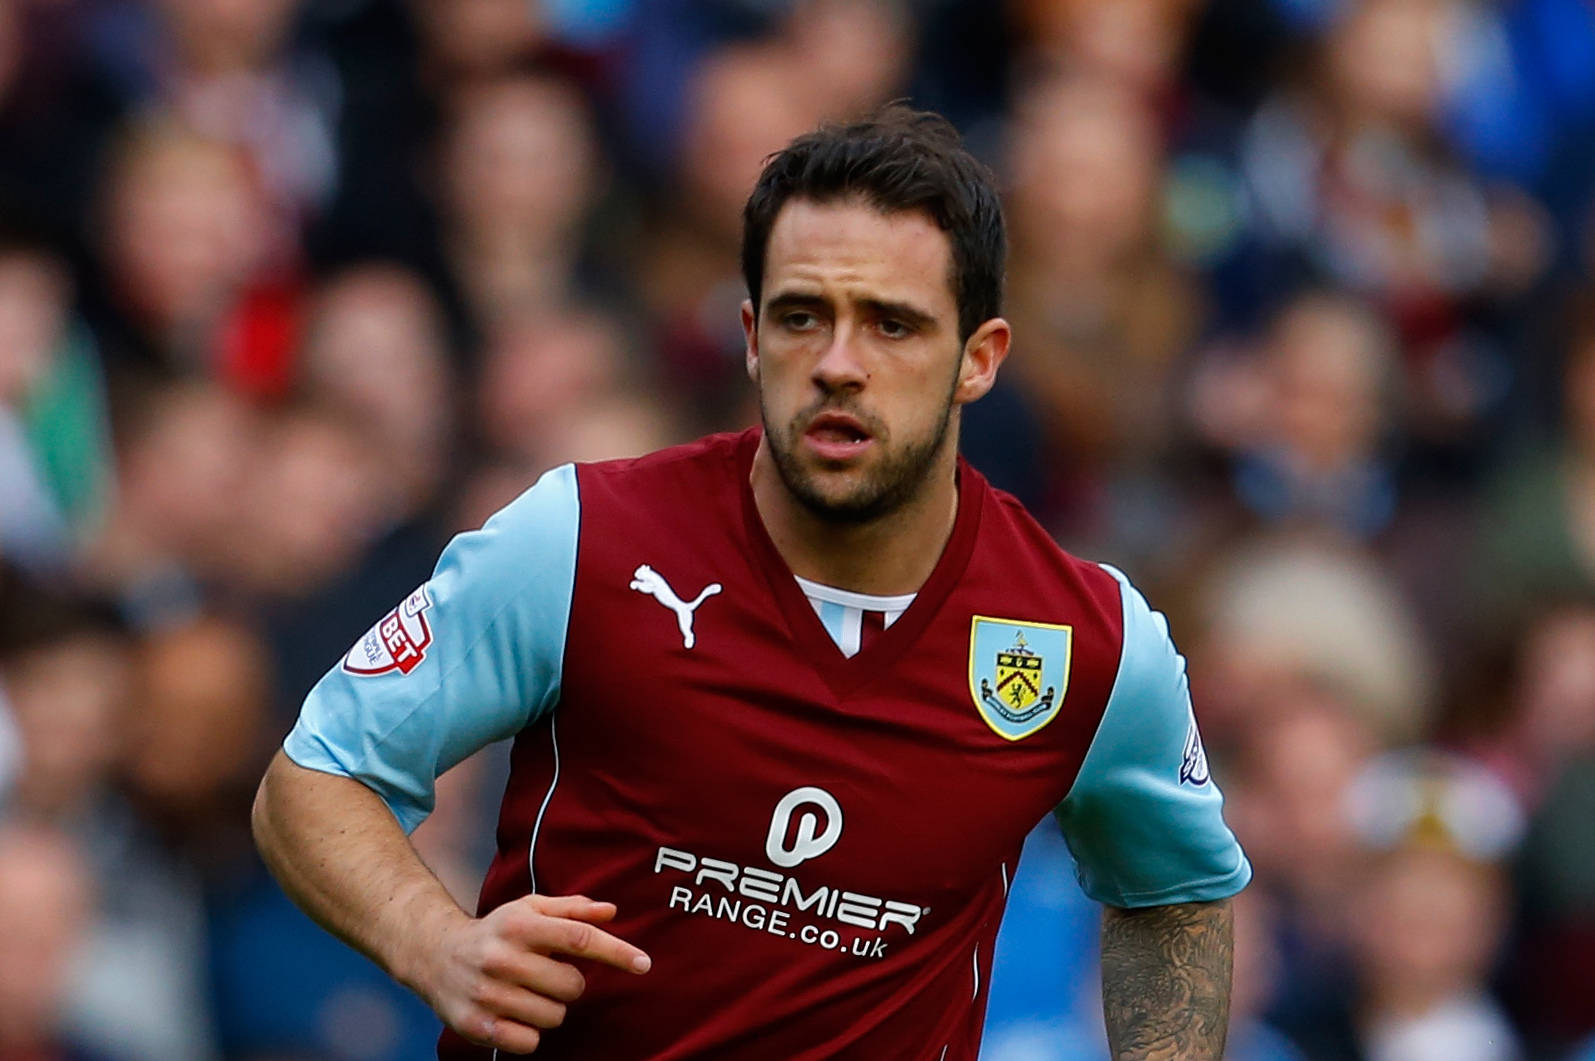 Danny Ings caught in his playful side post-match Wallpaper